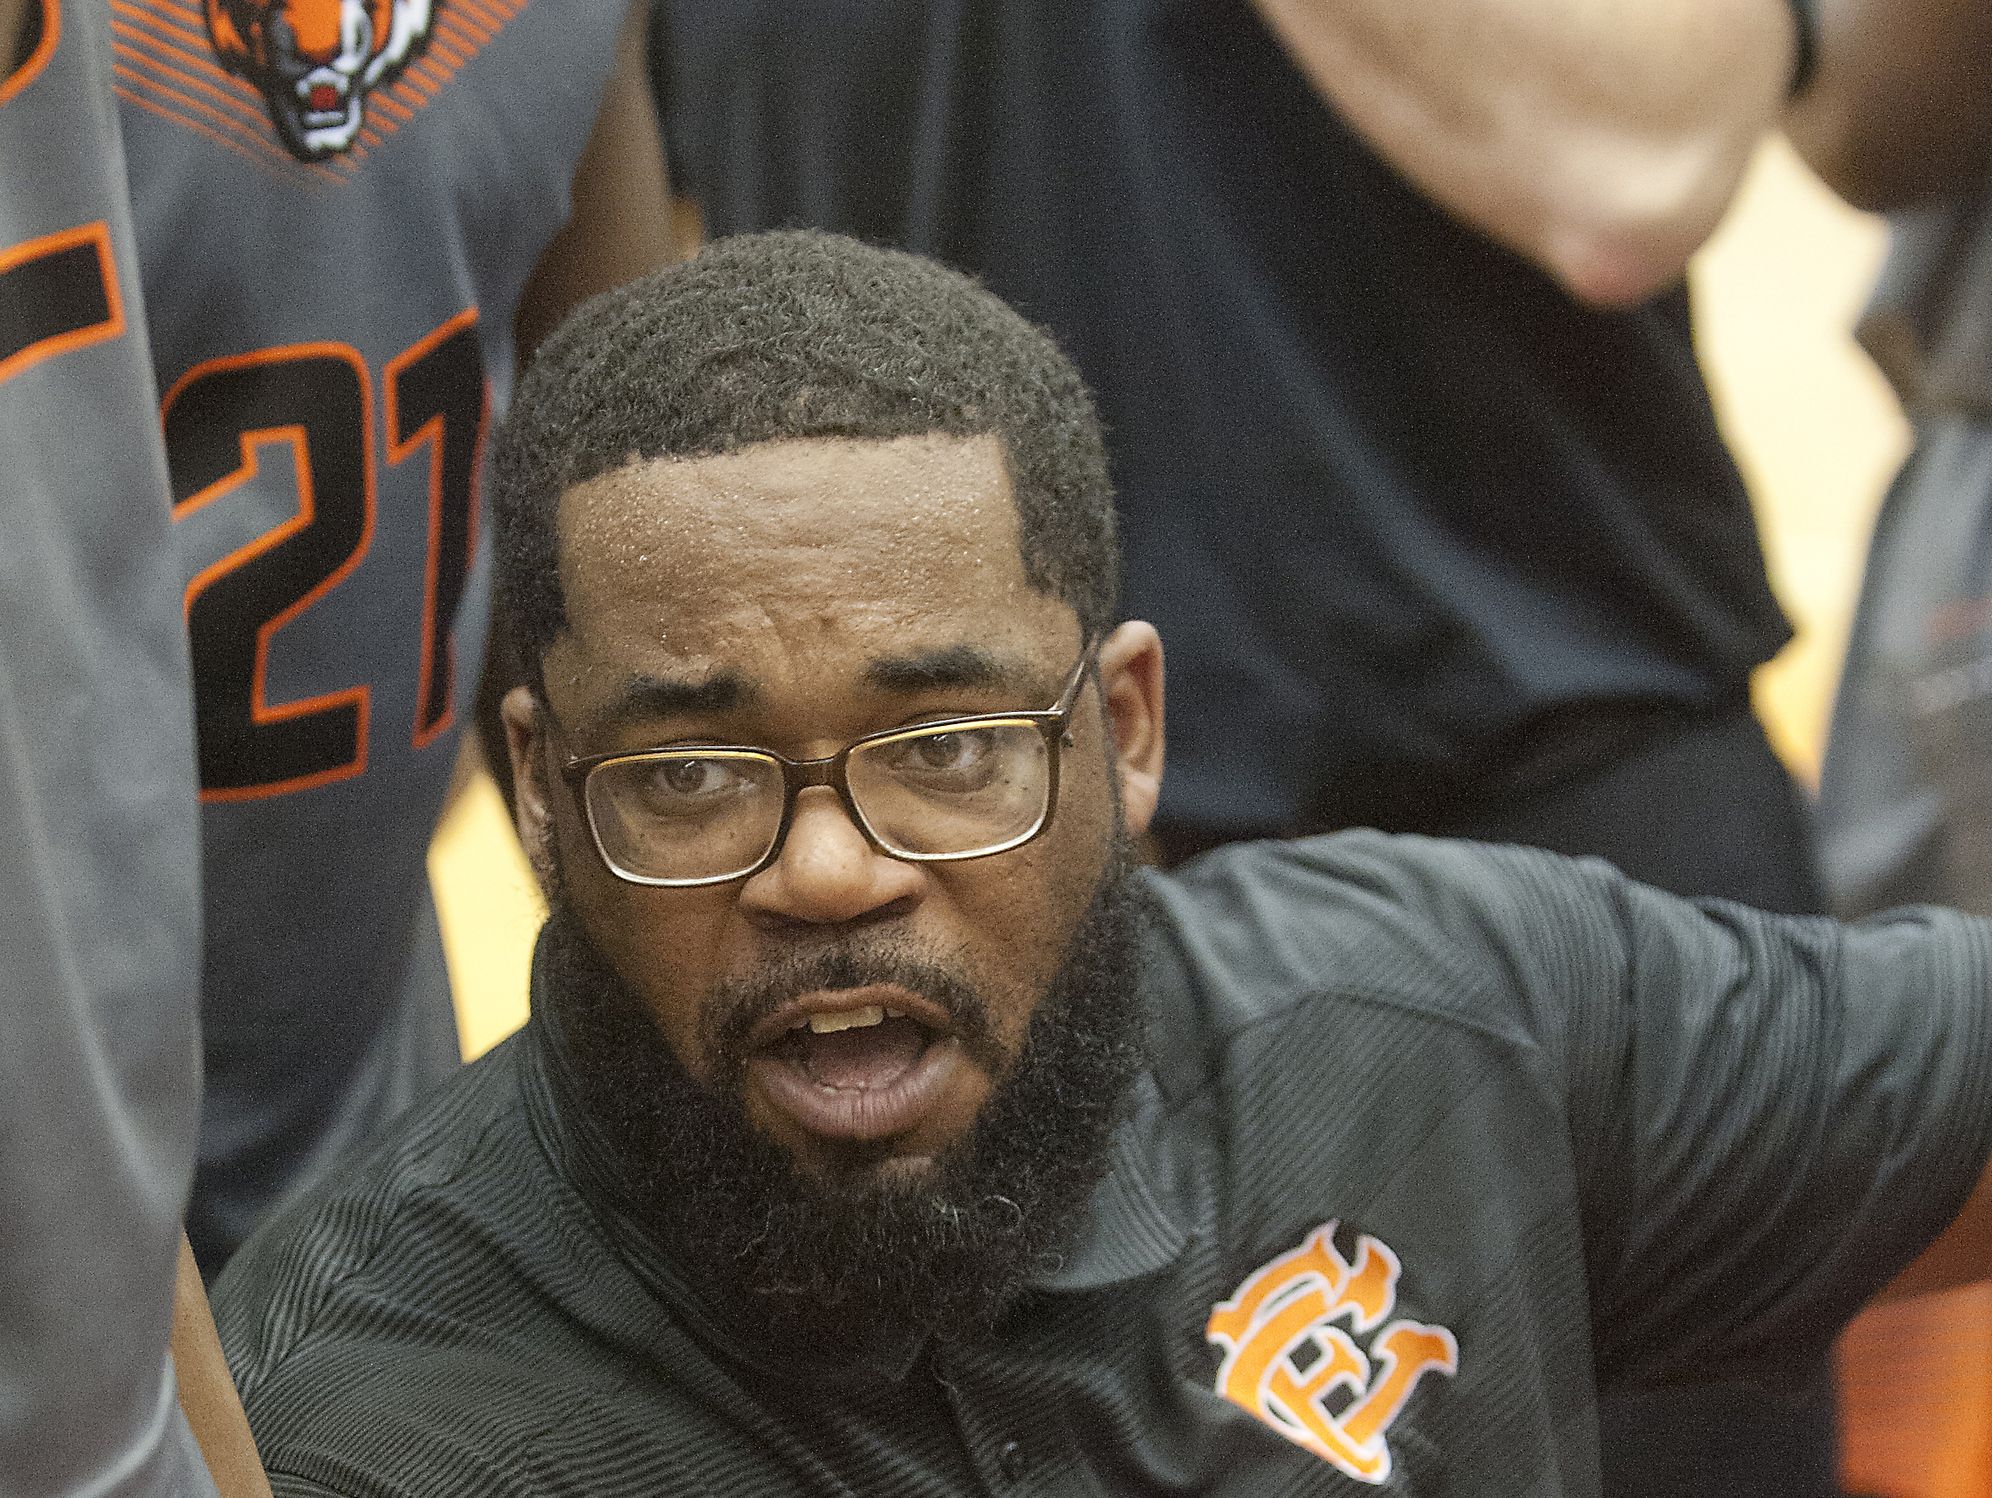 Fern Creek head basketball coach James Schooler, III talks to his players during a time-out. 16 December 2016